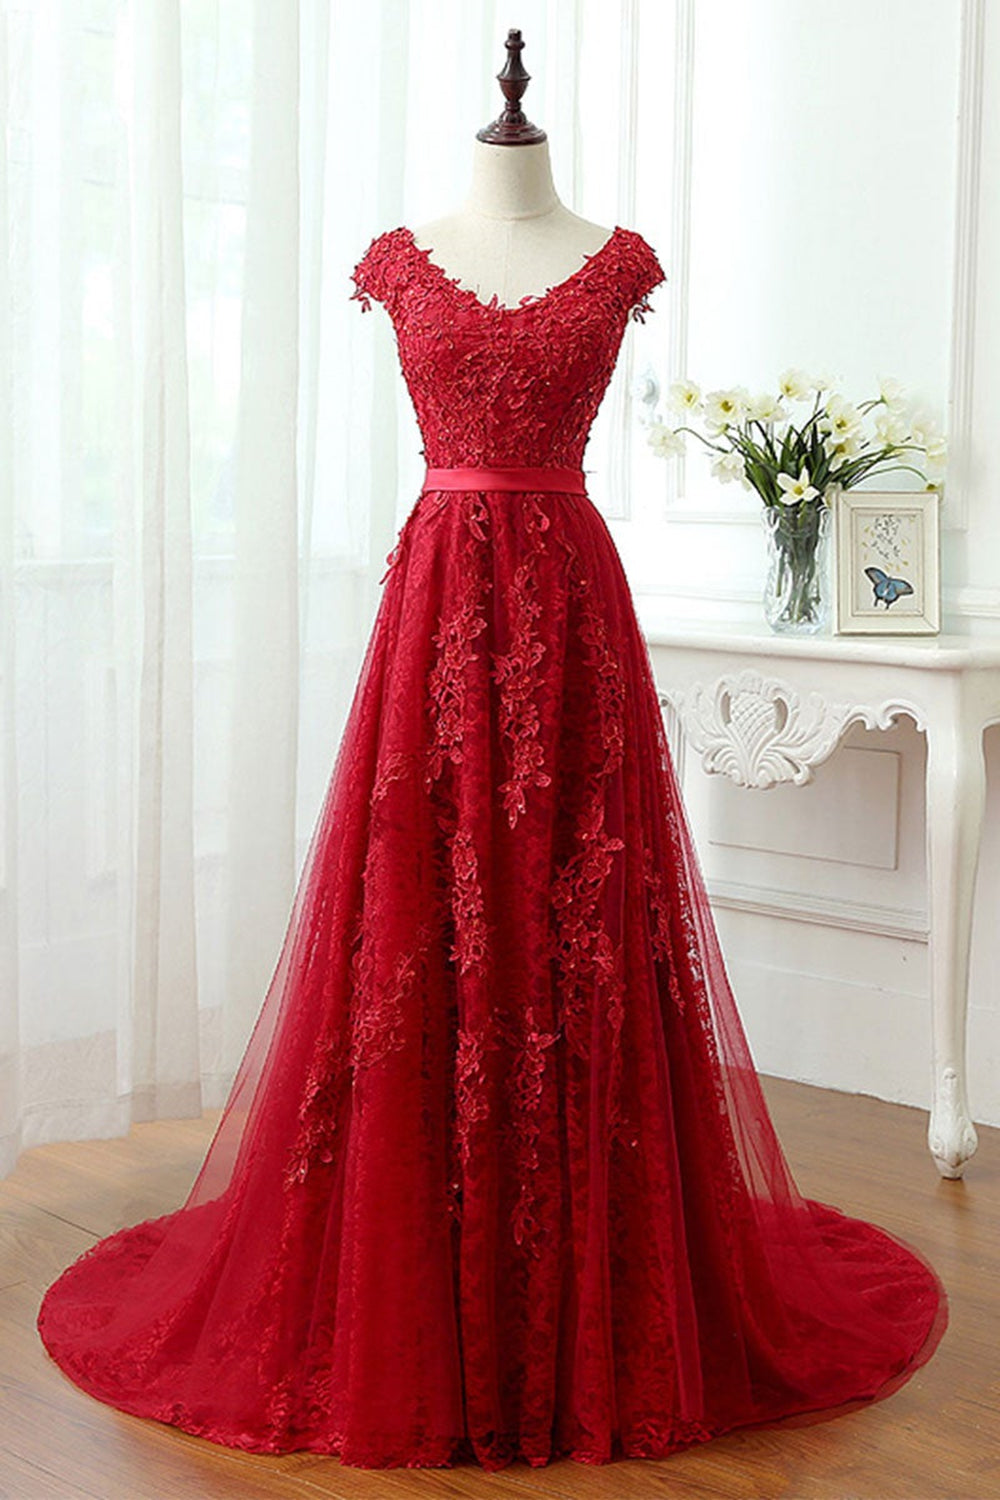 Round Neck Red Lace Long Prom Dresses, Cap Sleeves Red Formal Dresses, Red Lace Evening Dresses